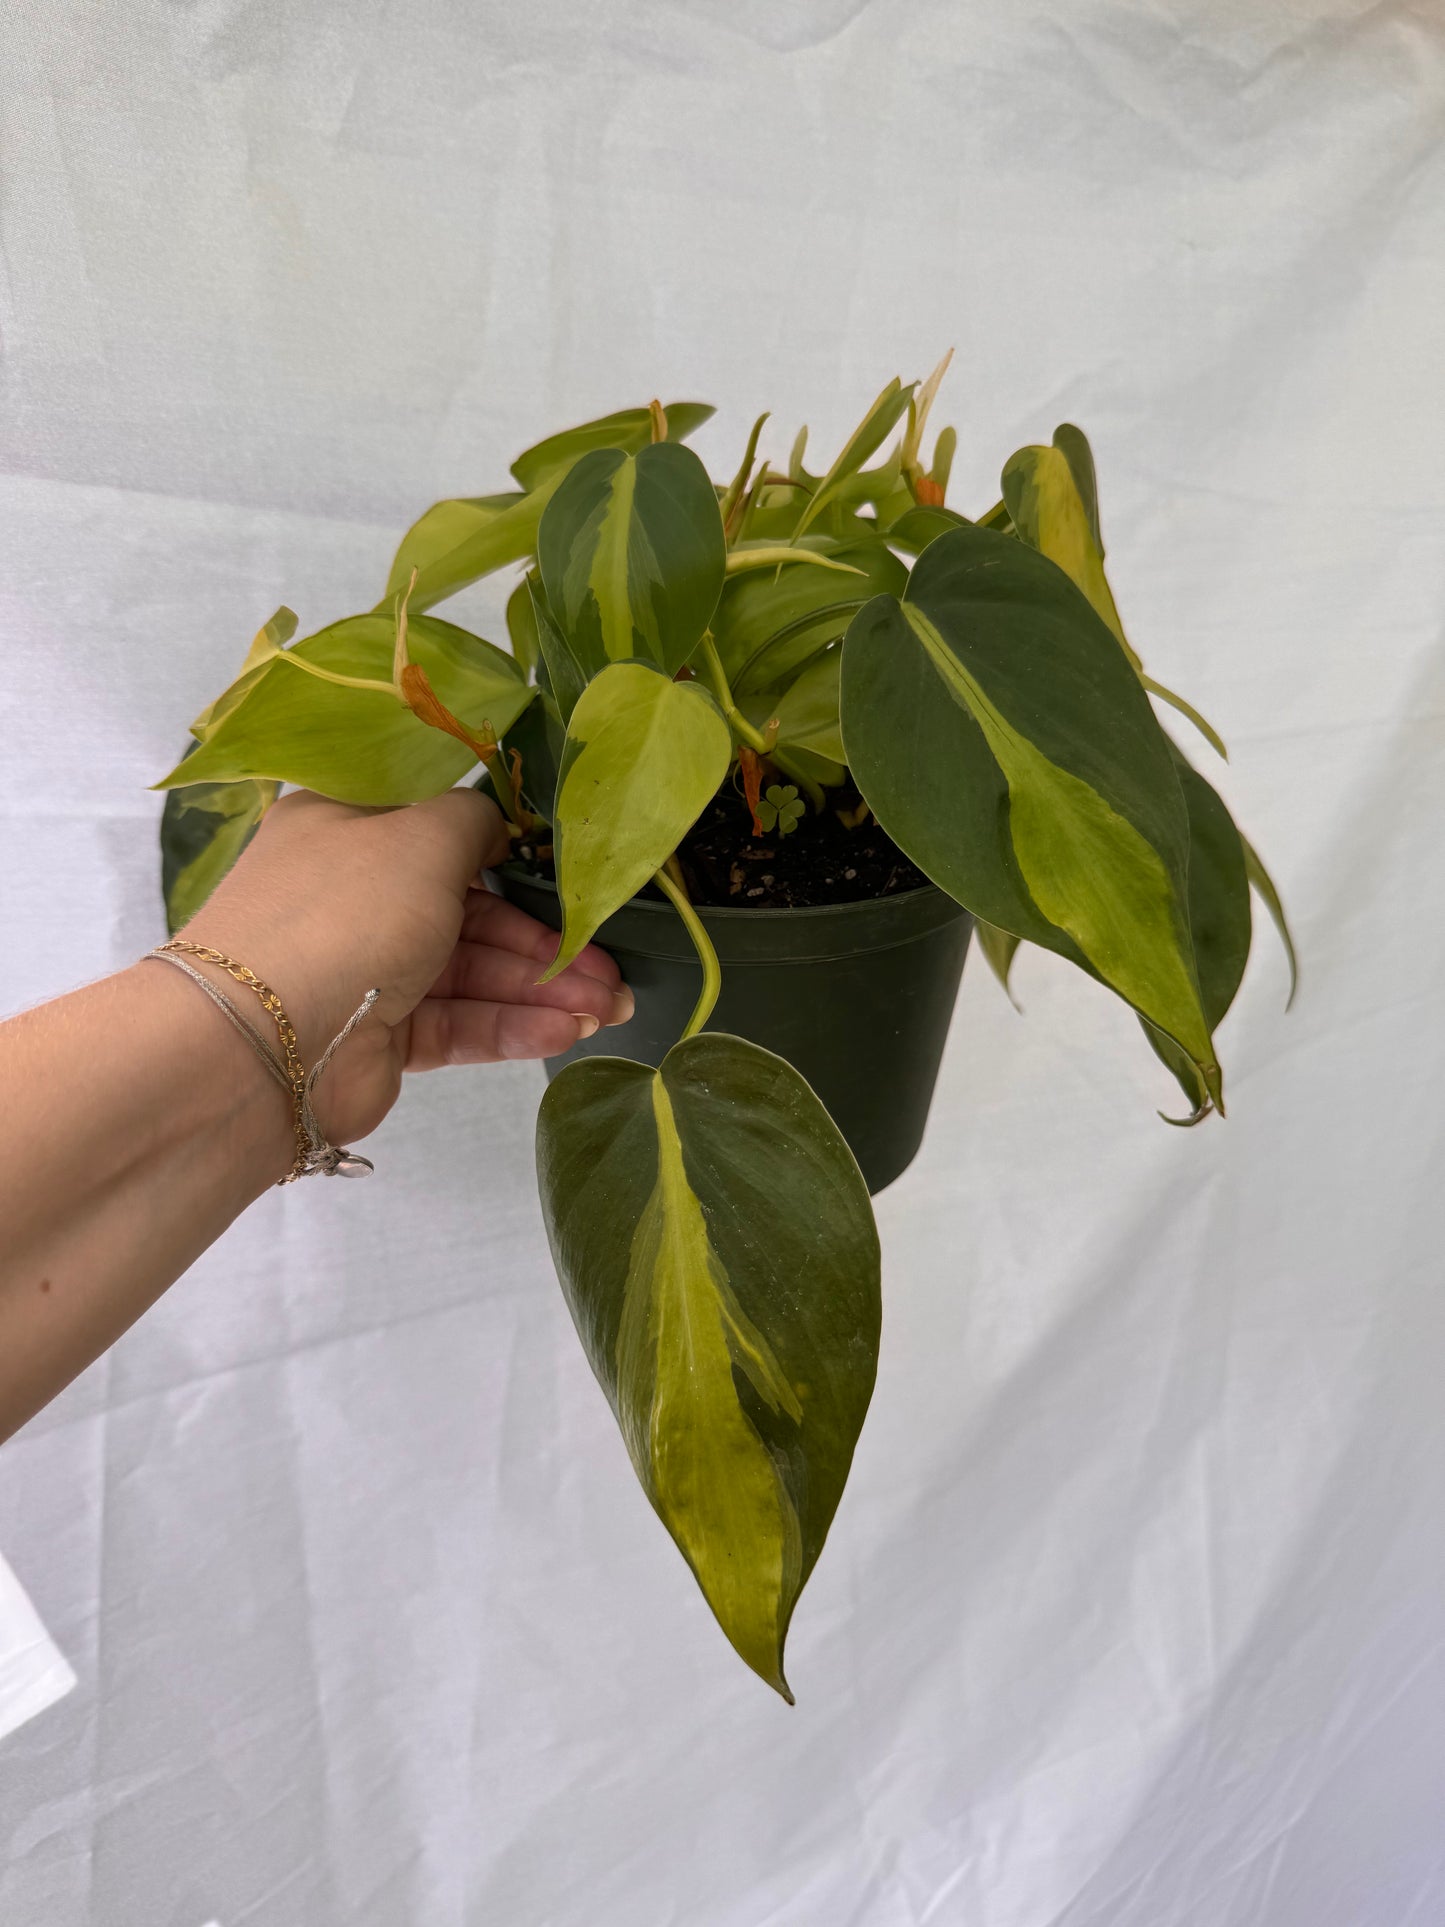 6” Philodendron Basil